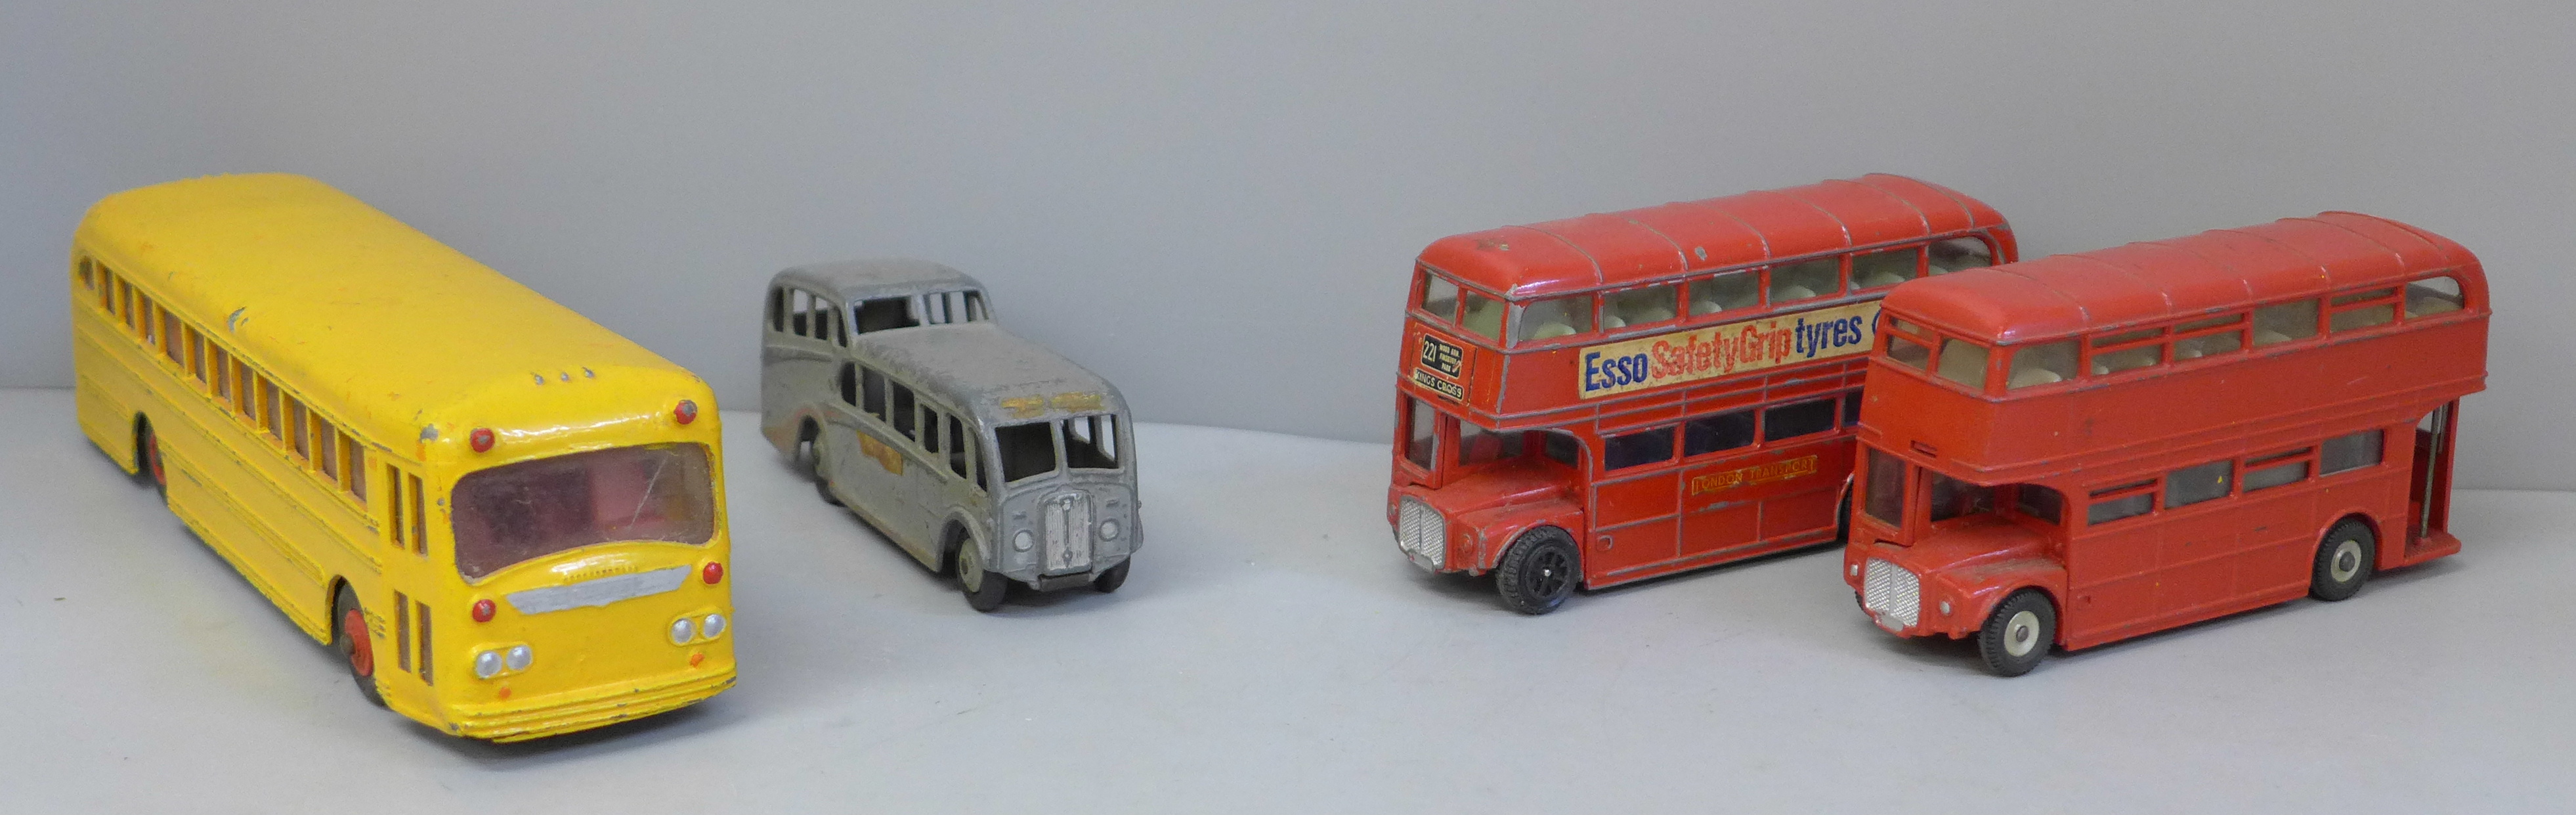 Four vintage buses, Dinky Supertoys Wayne Bus, two Dinky Toys Routemaster buses, and a Dinky Toys